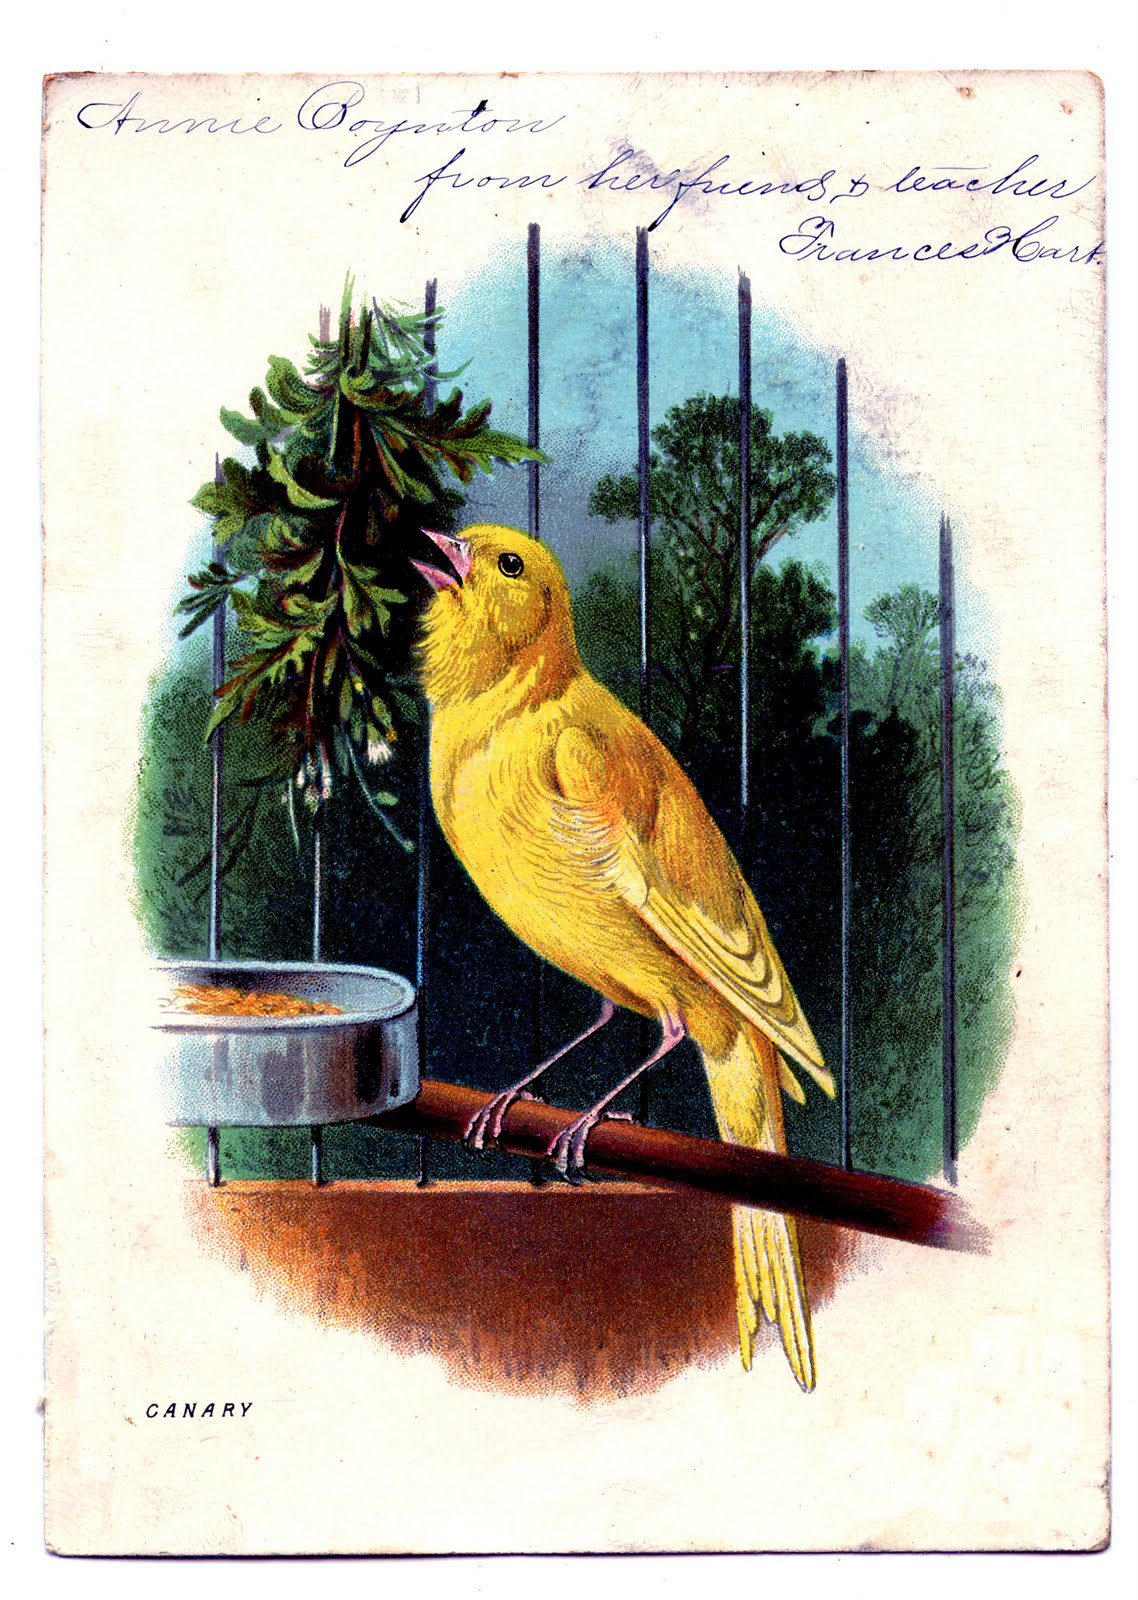 A canary bird in a cage